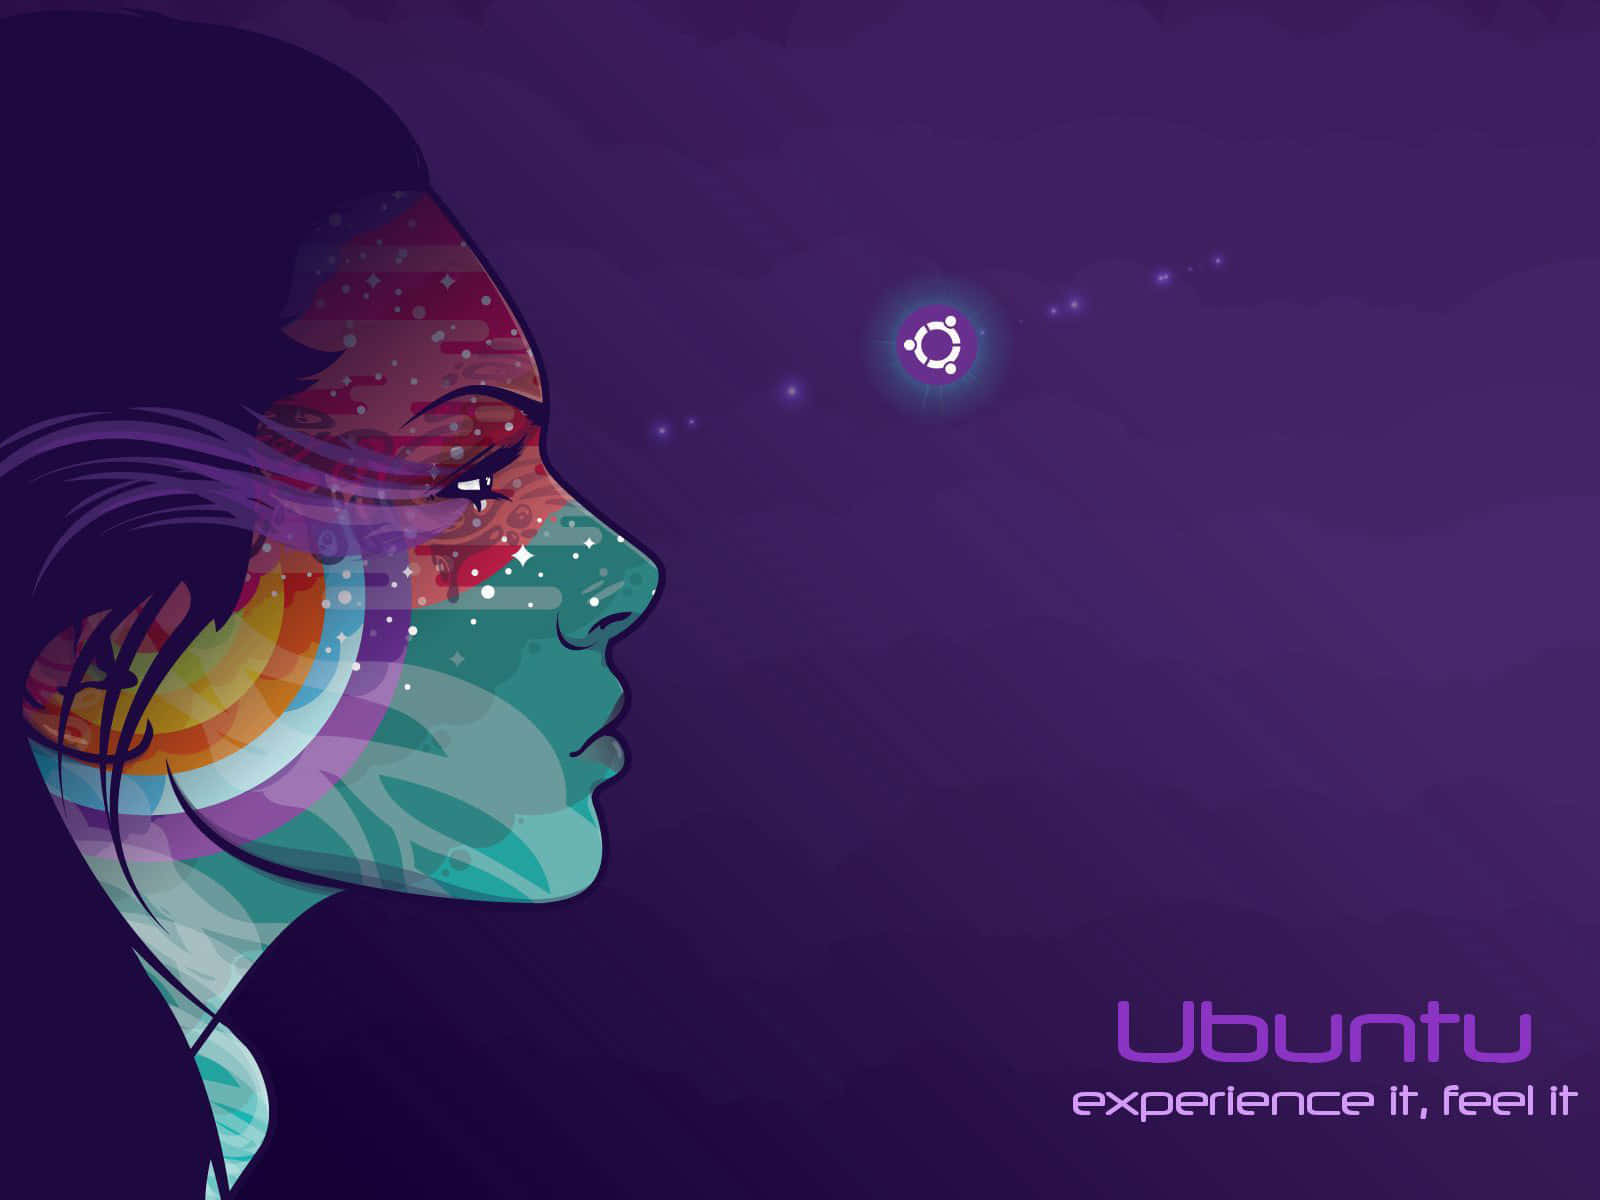 A Woman's Face With The Words Ubuntu Experience It